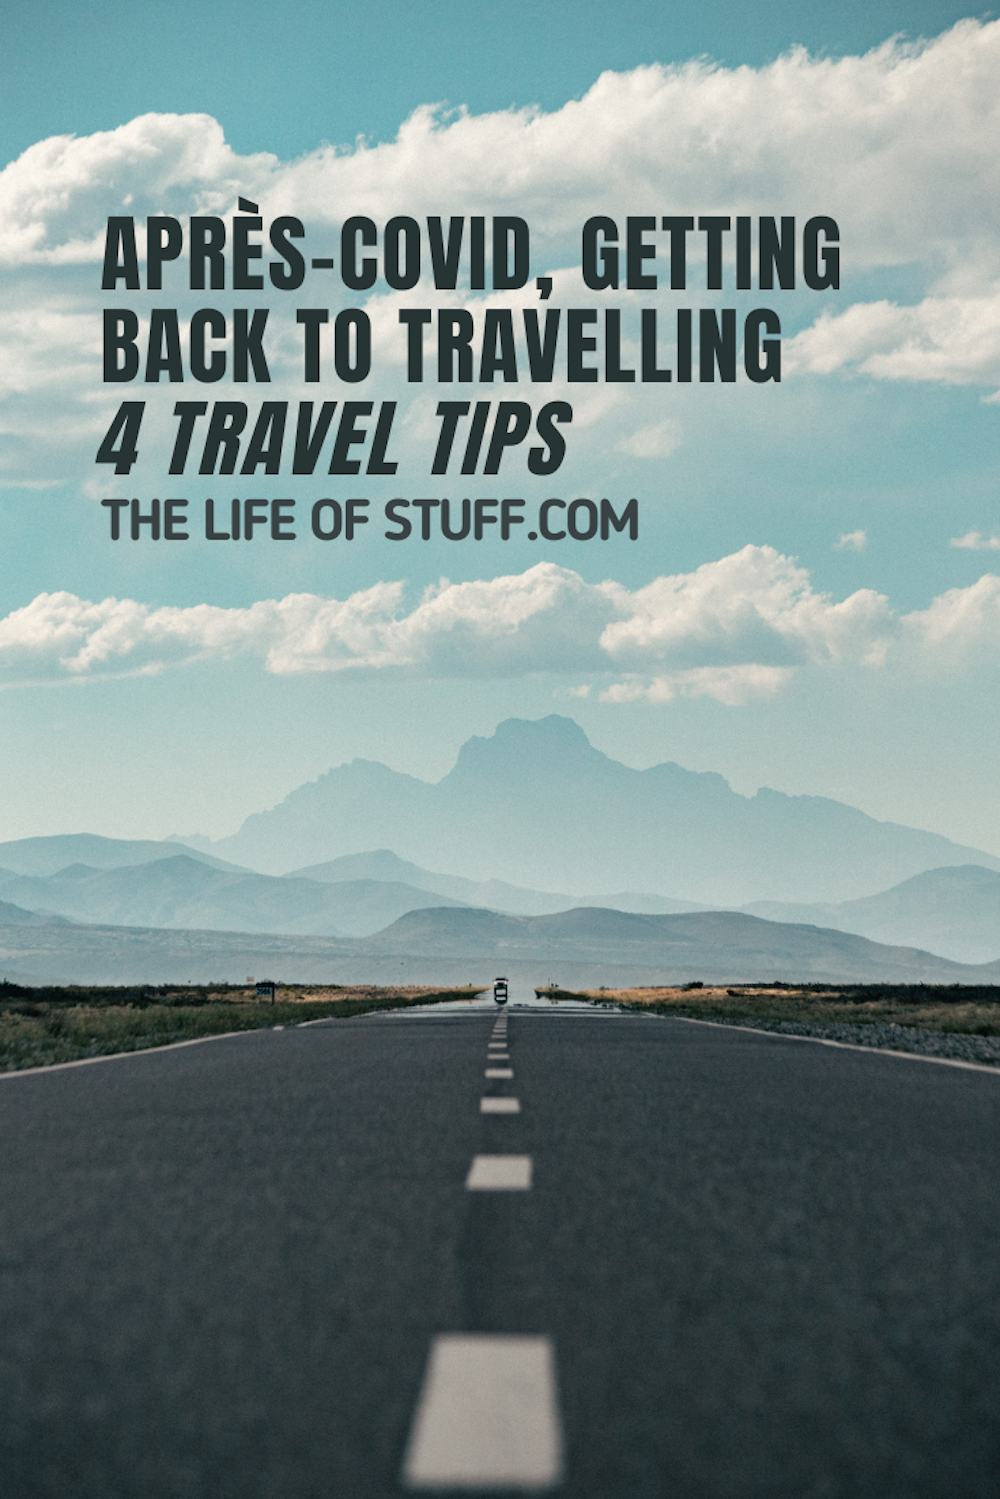 Après-Covid, Getting Back to Travelling - 4 Travel Tips - The Life of Stuff